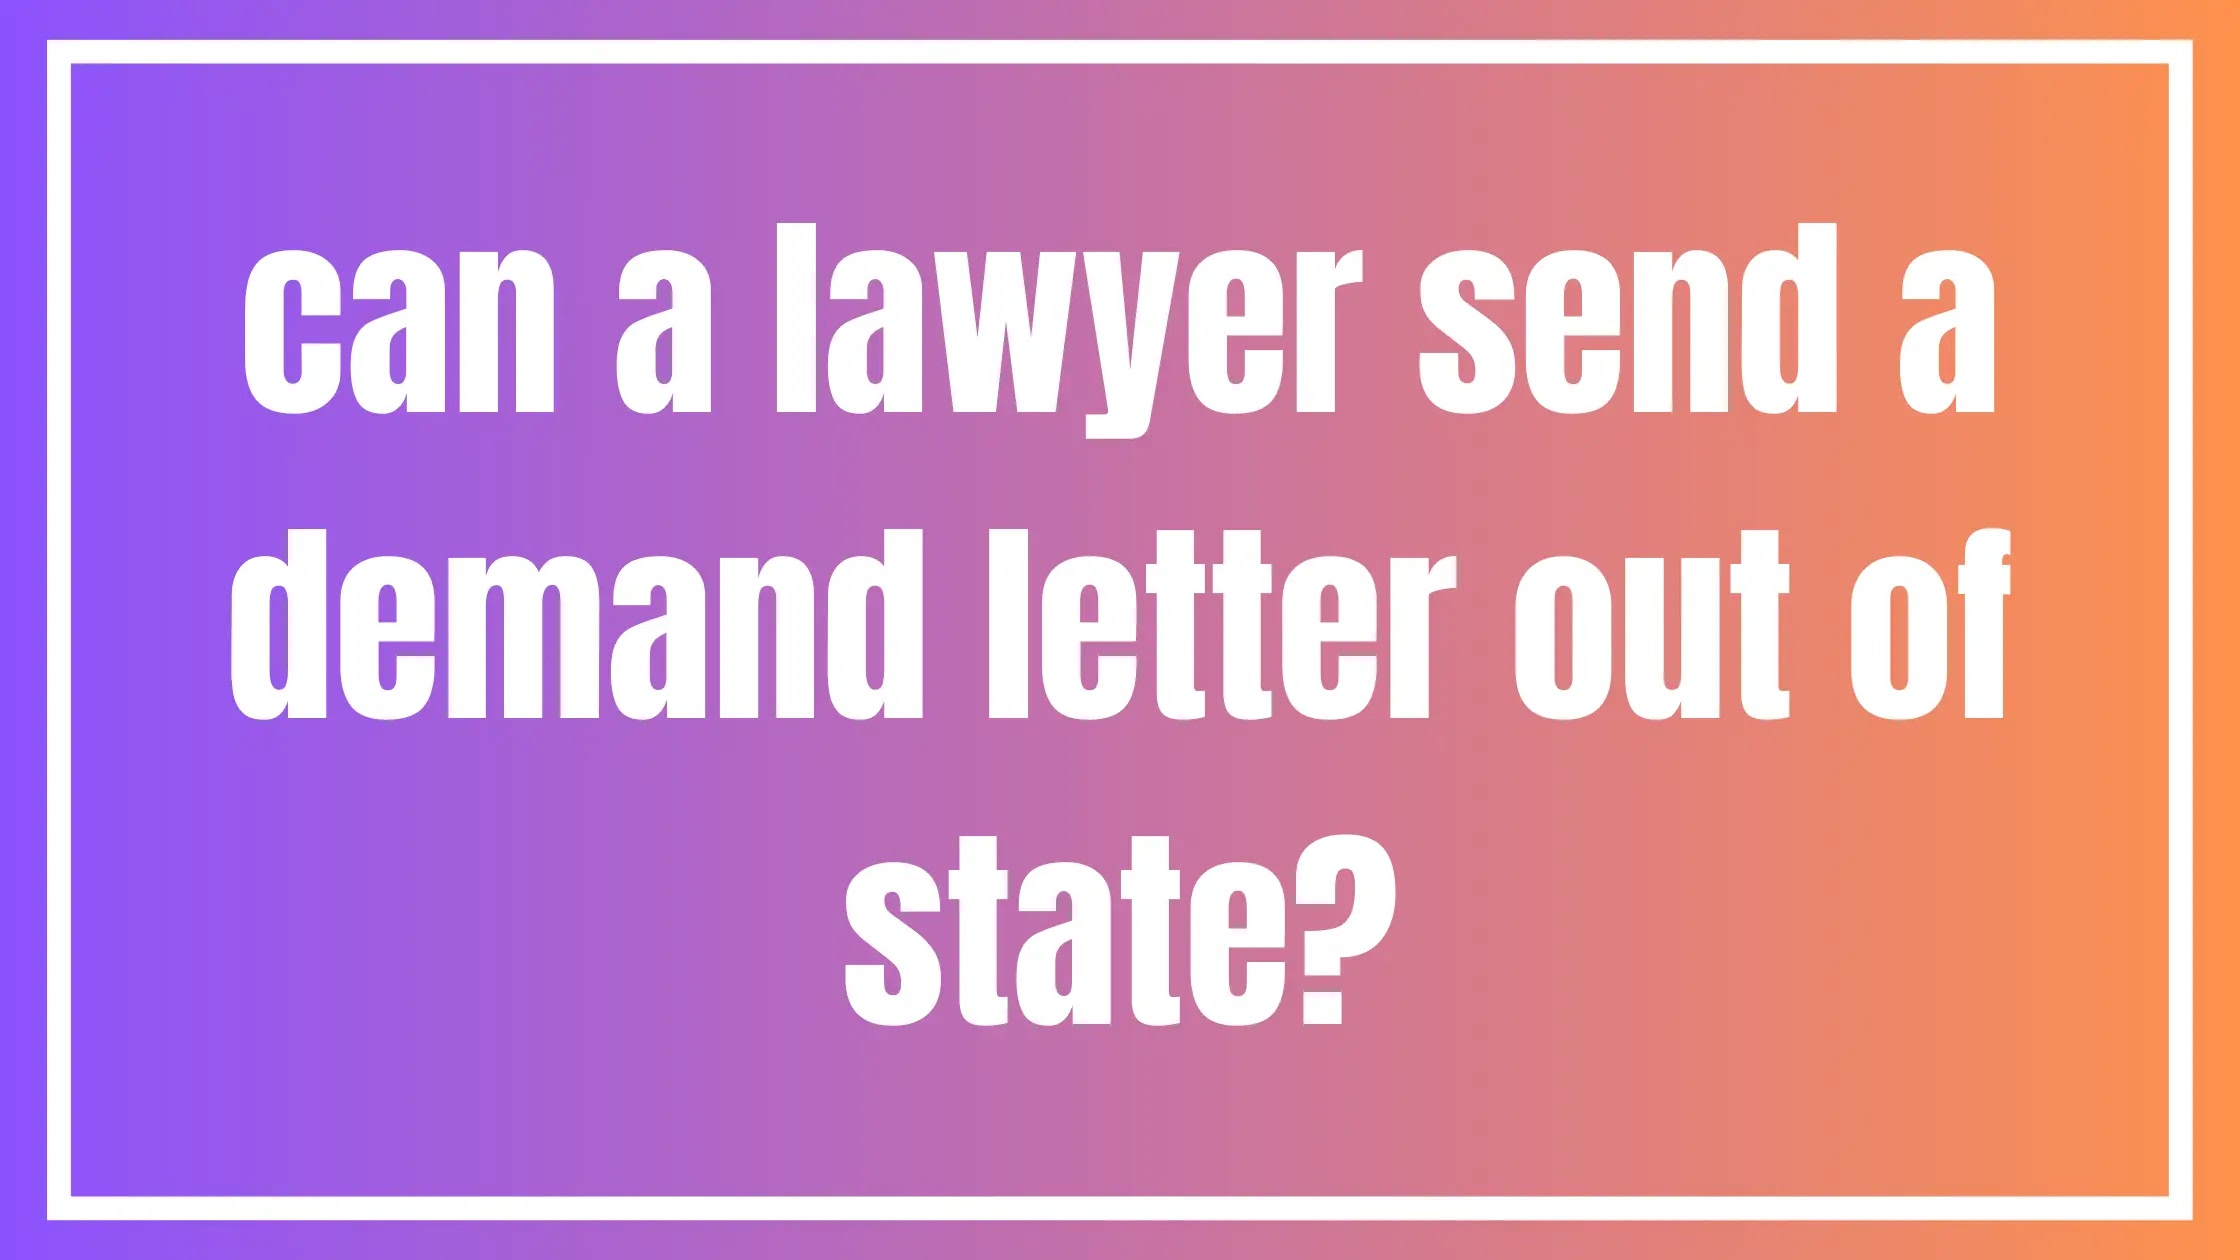 can a lawyer send a demand letter out of state